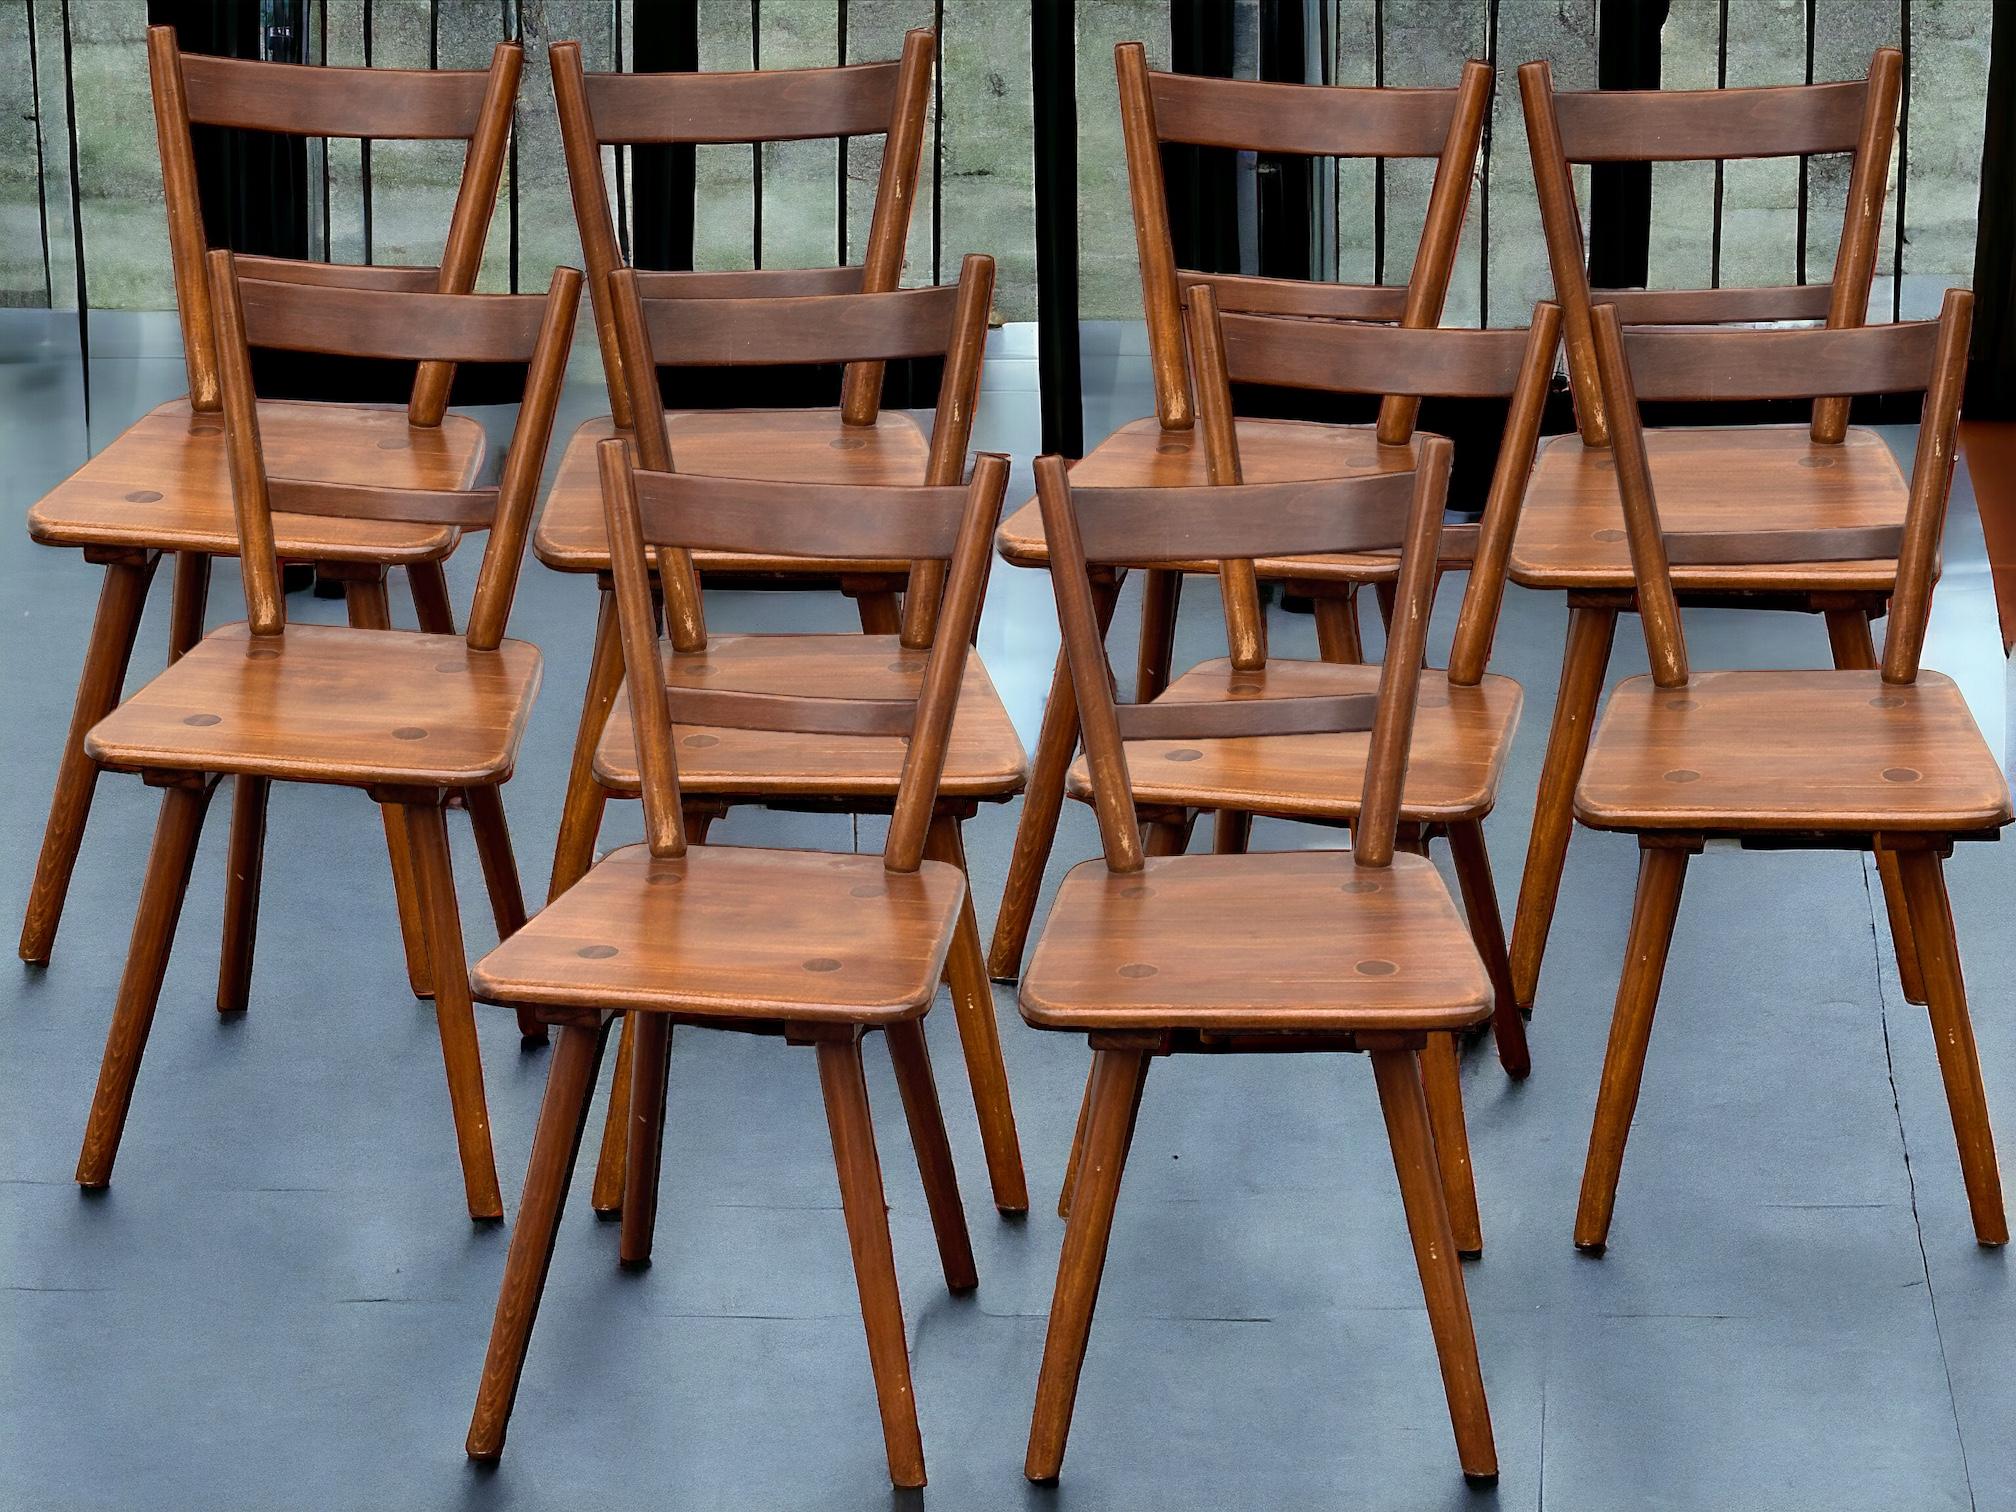 A set consisting of 10 chairs out of the Humbser brewery in Fürth Bavaria. These chairs were used in the brewery restaurant's dining room for years. After the brewery closed, we were able to purchase these chairs and also some tables from the estate